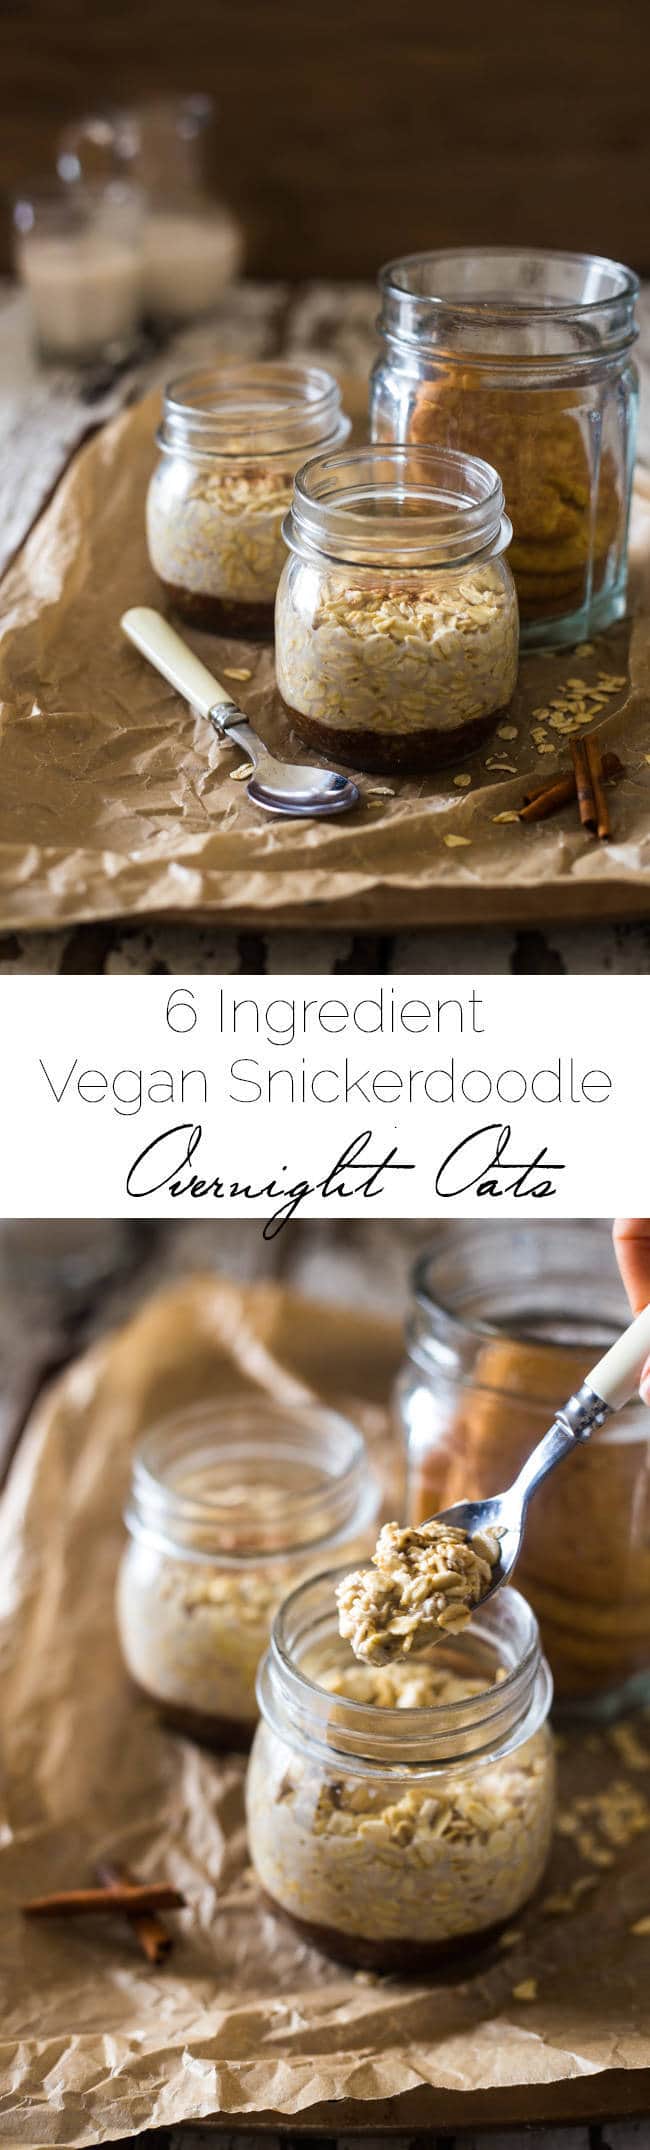 Snickerdoodle Vegan Overnight Oats - Ready in 10 minutes, only have 6 ingredients and taste like a snickerdoodle! Perfect for a healthy, gluten free and make-ahead breakfast on busy mornings! | Foodfaithfitness.com | @FoodFaithFit